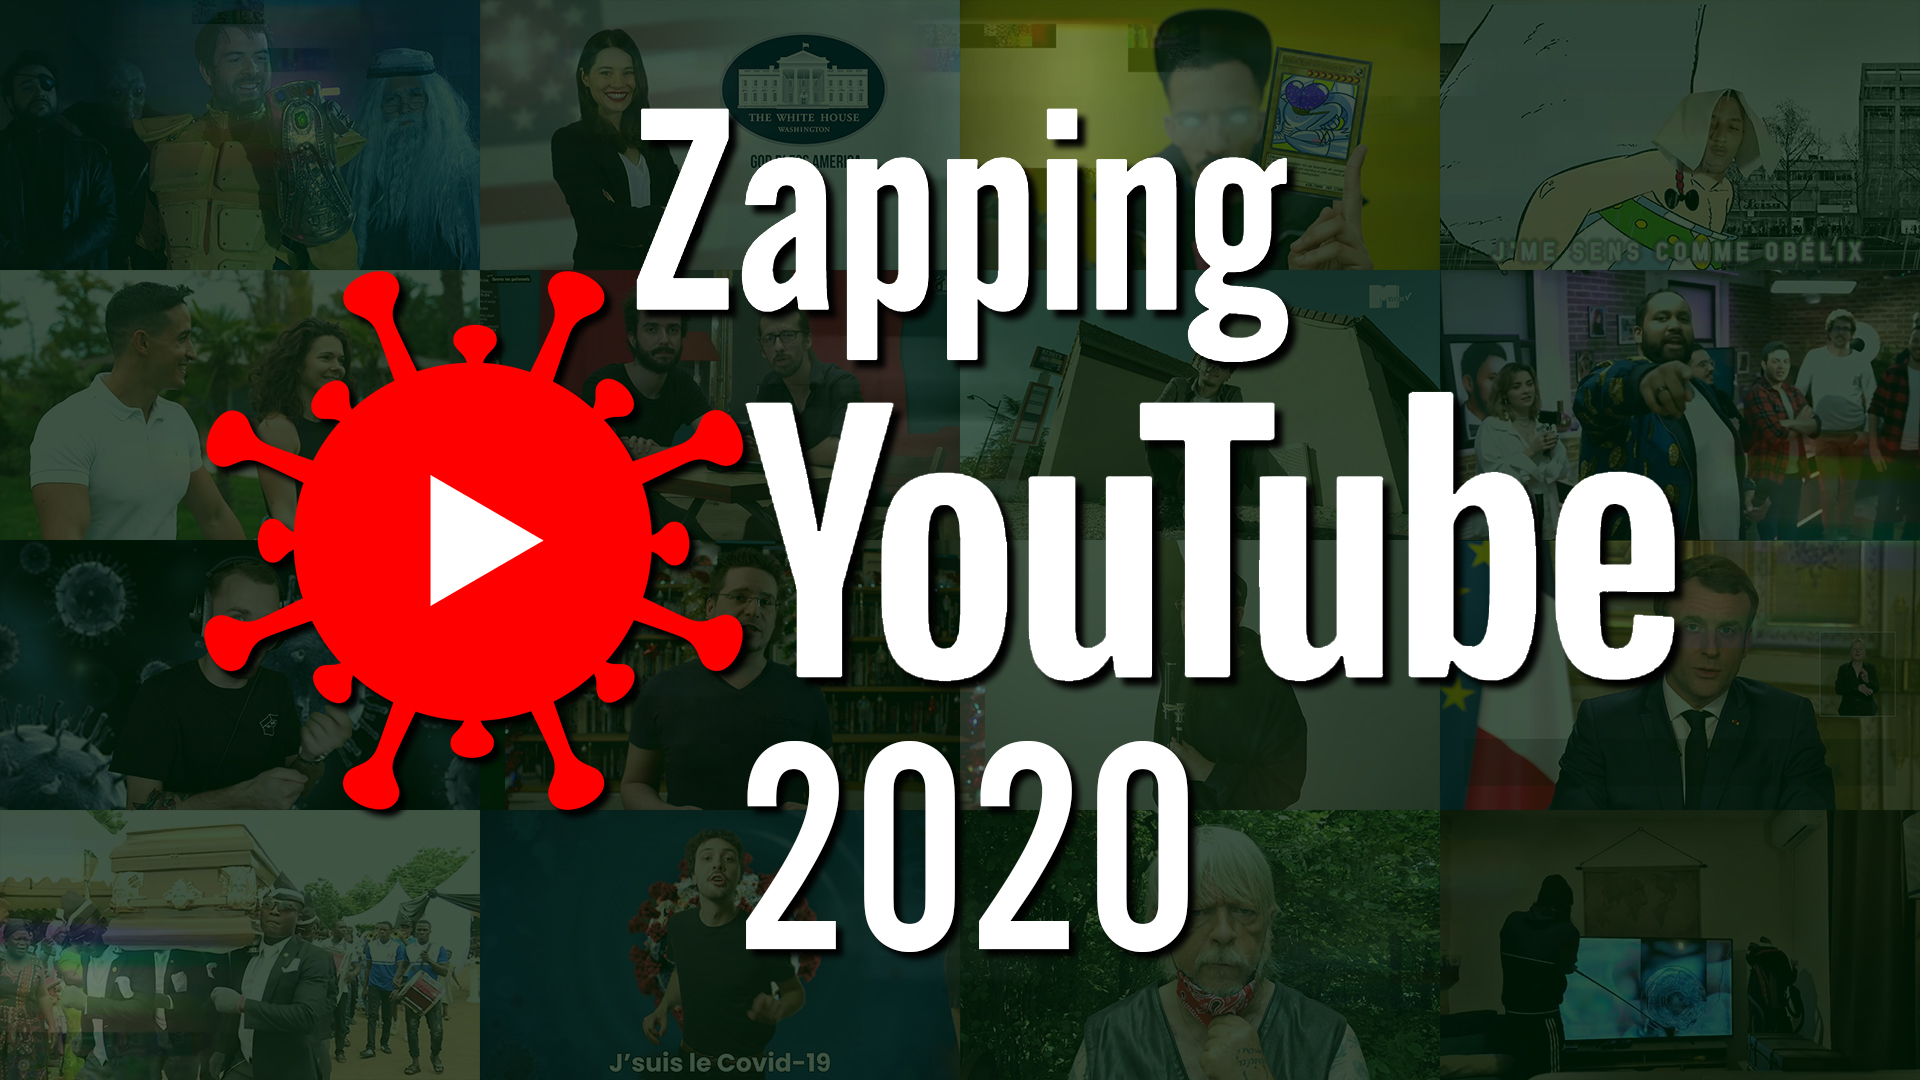 Zapping YouTube 2020